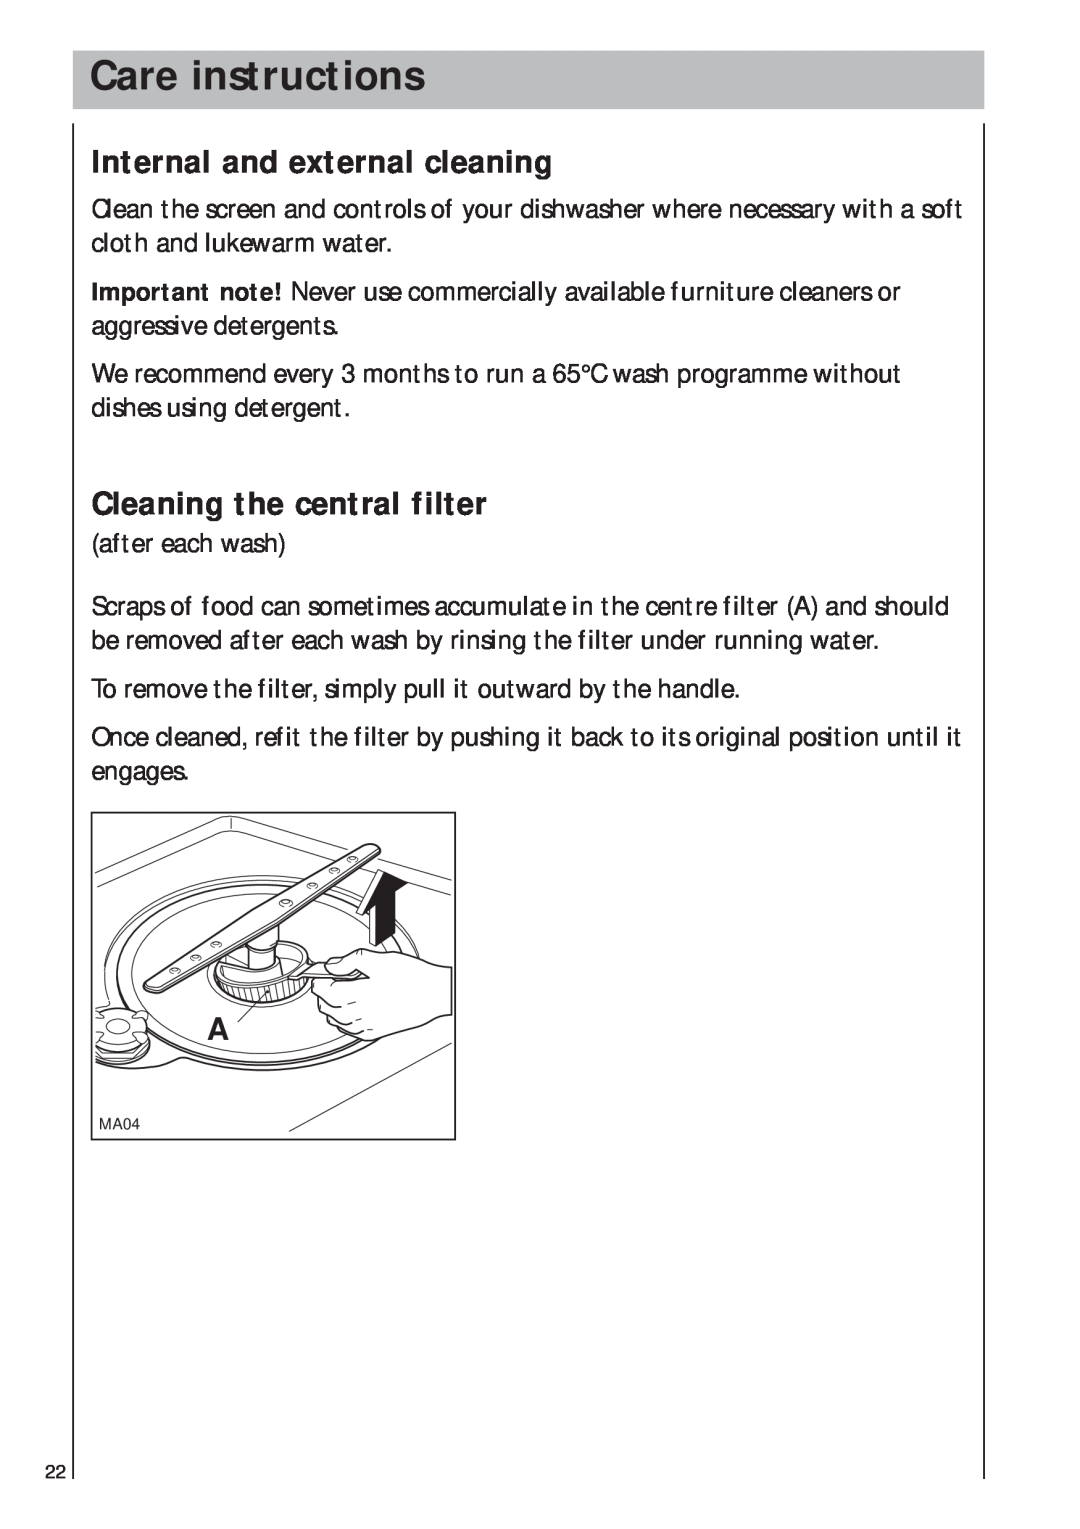 AEG 403 manual Care instructions, Internal and external cleaning, Cleaning the central filter 